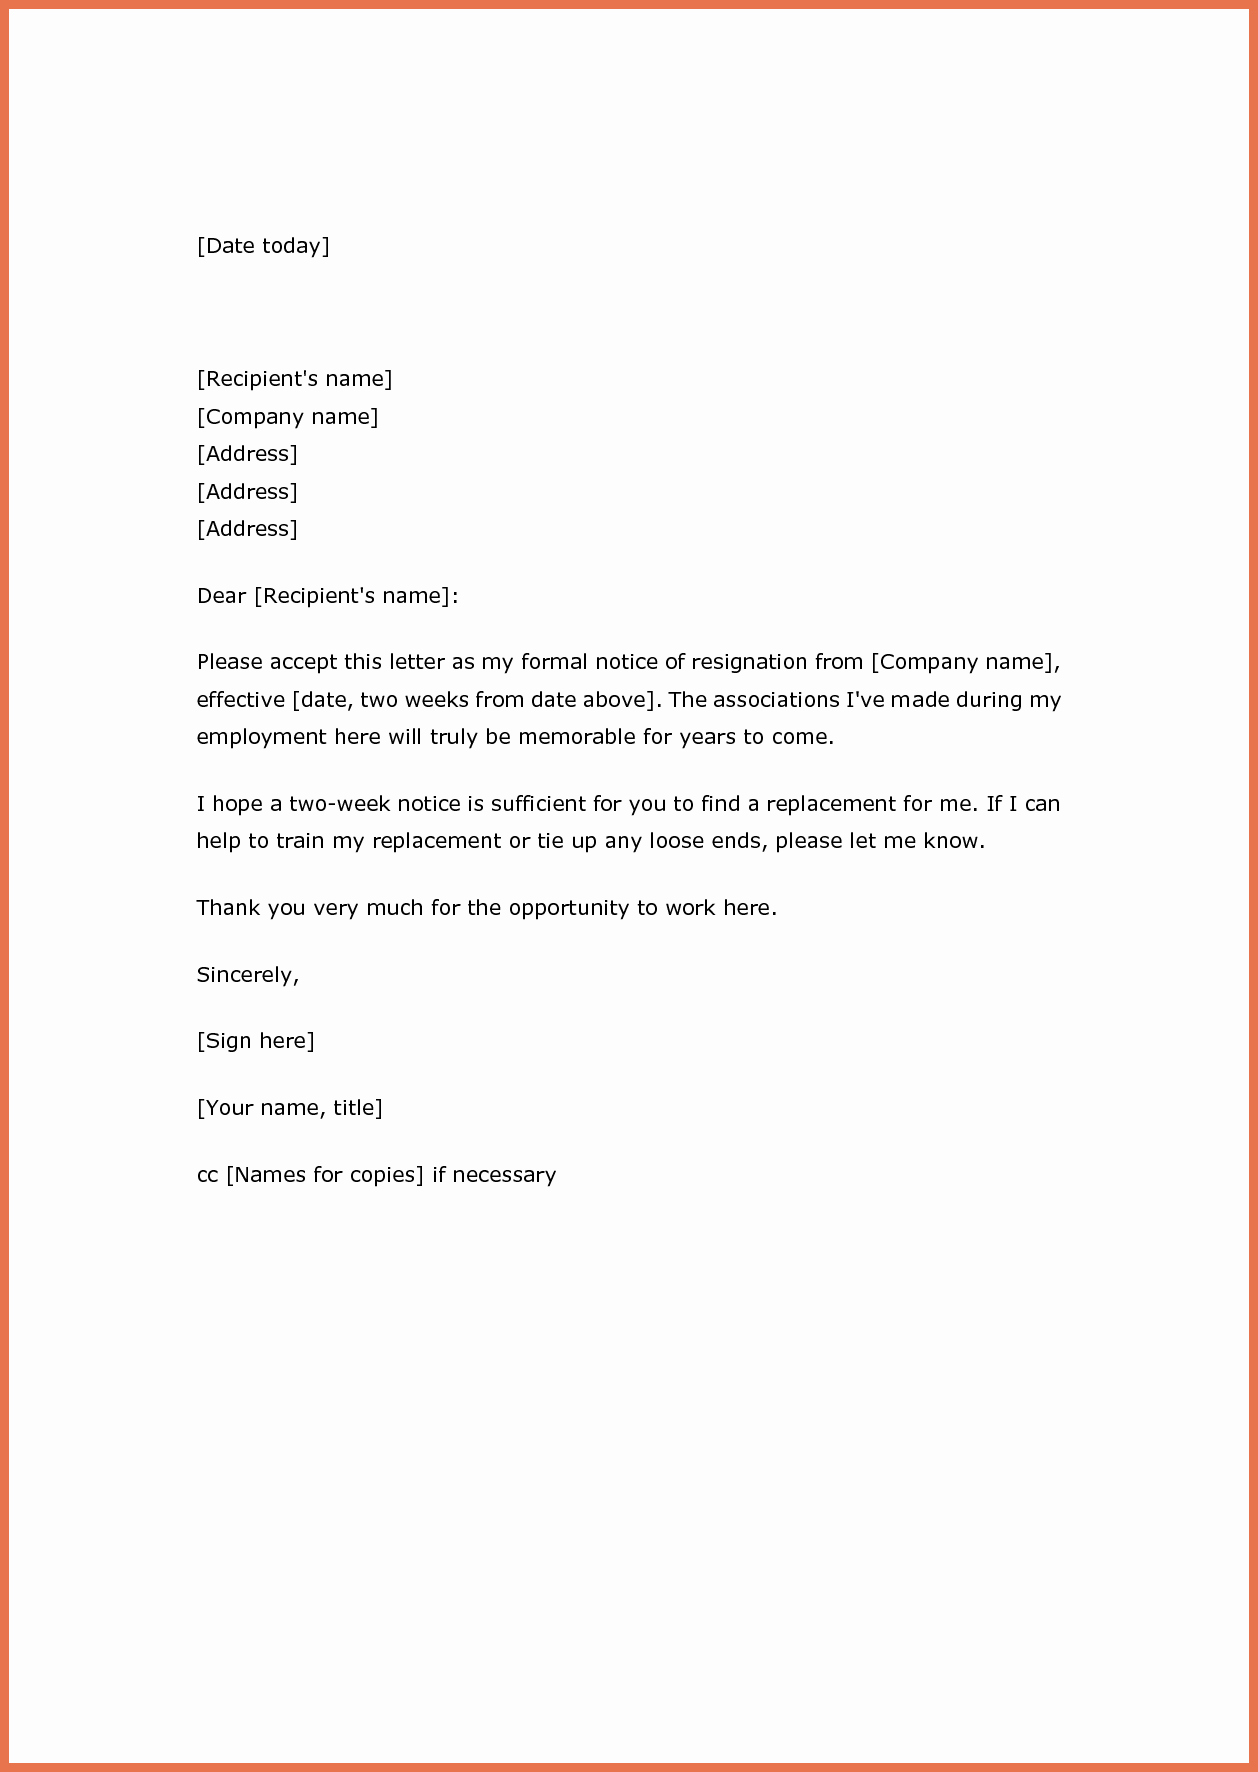 Two Weeks’ Notice Resignation Letter Samples